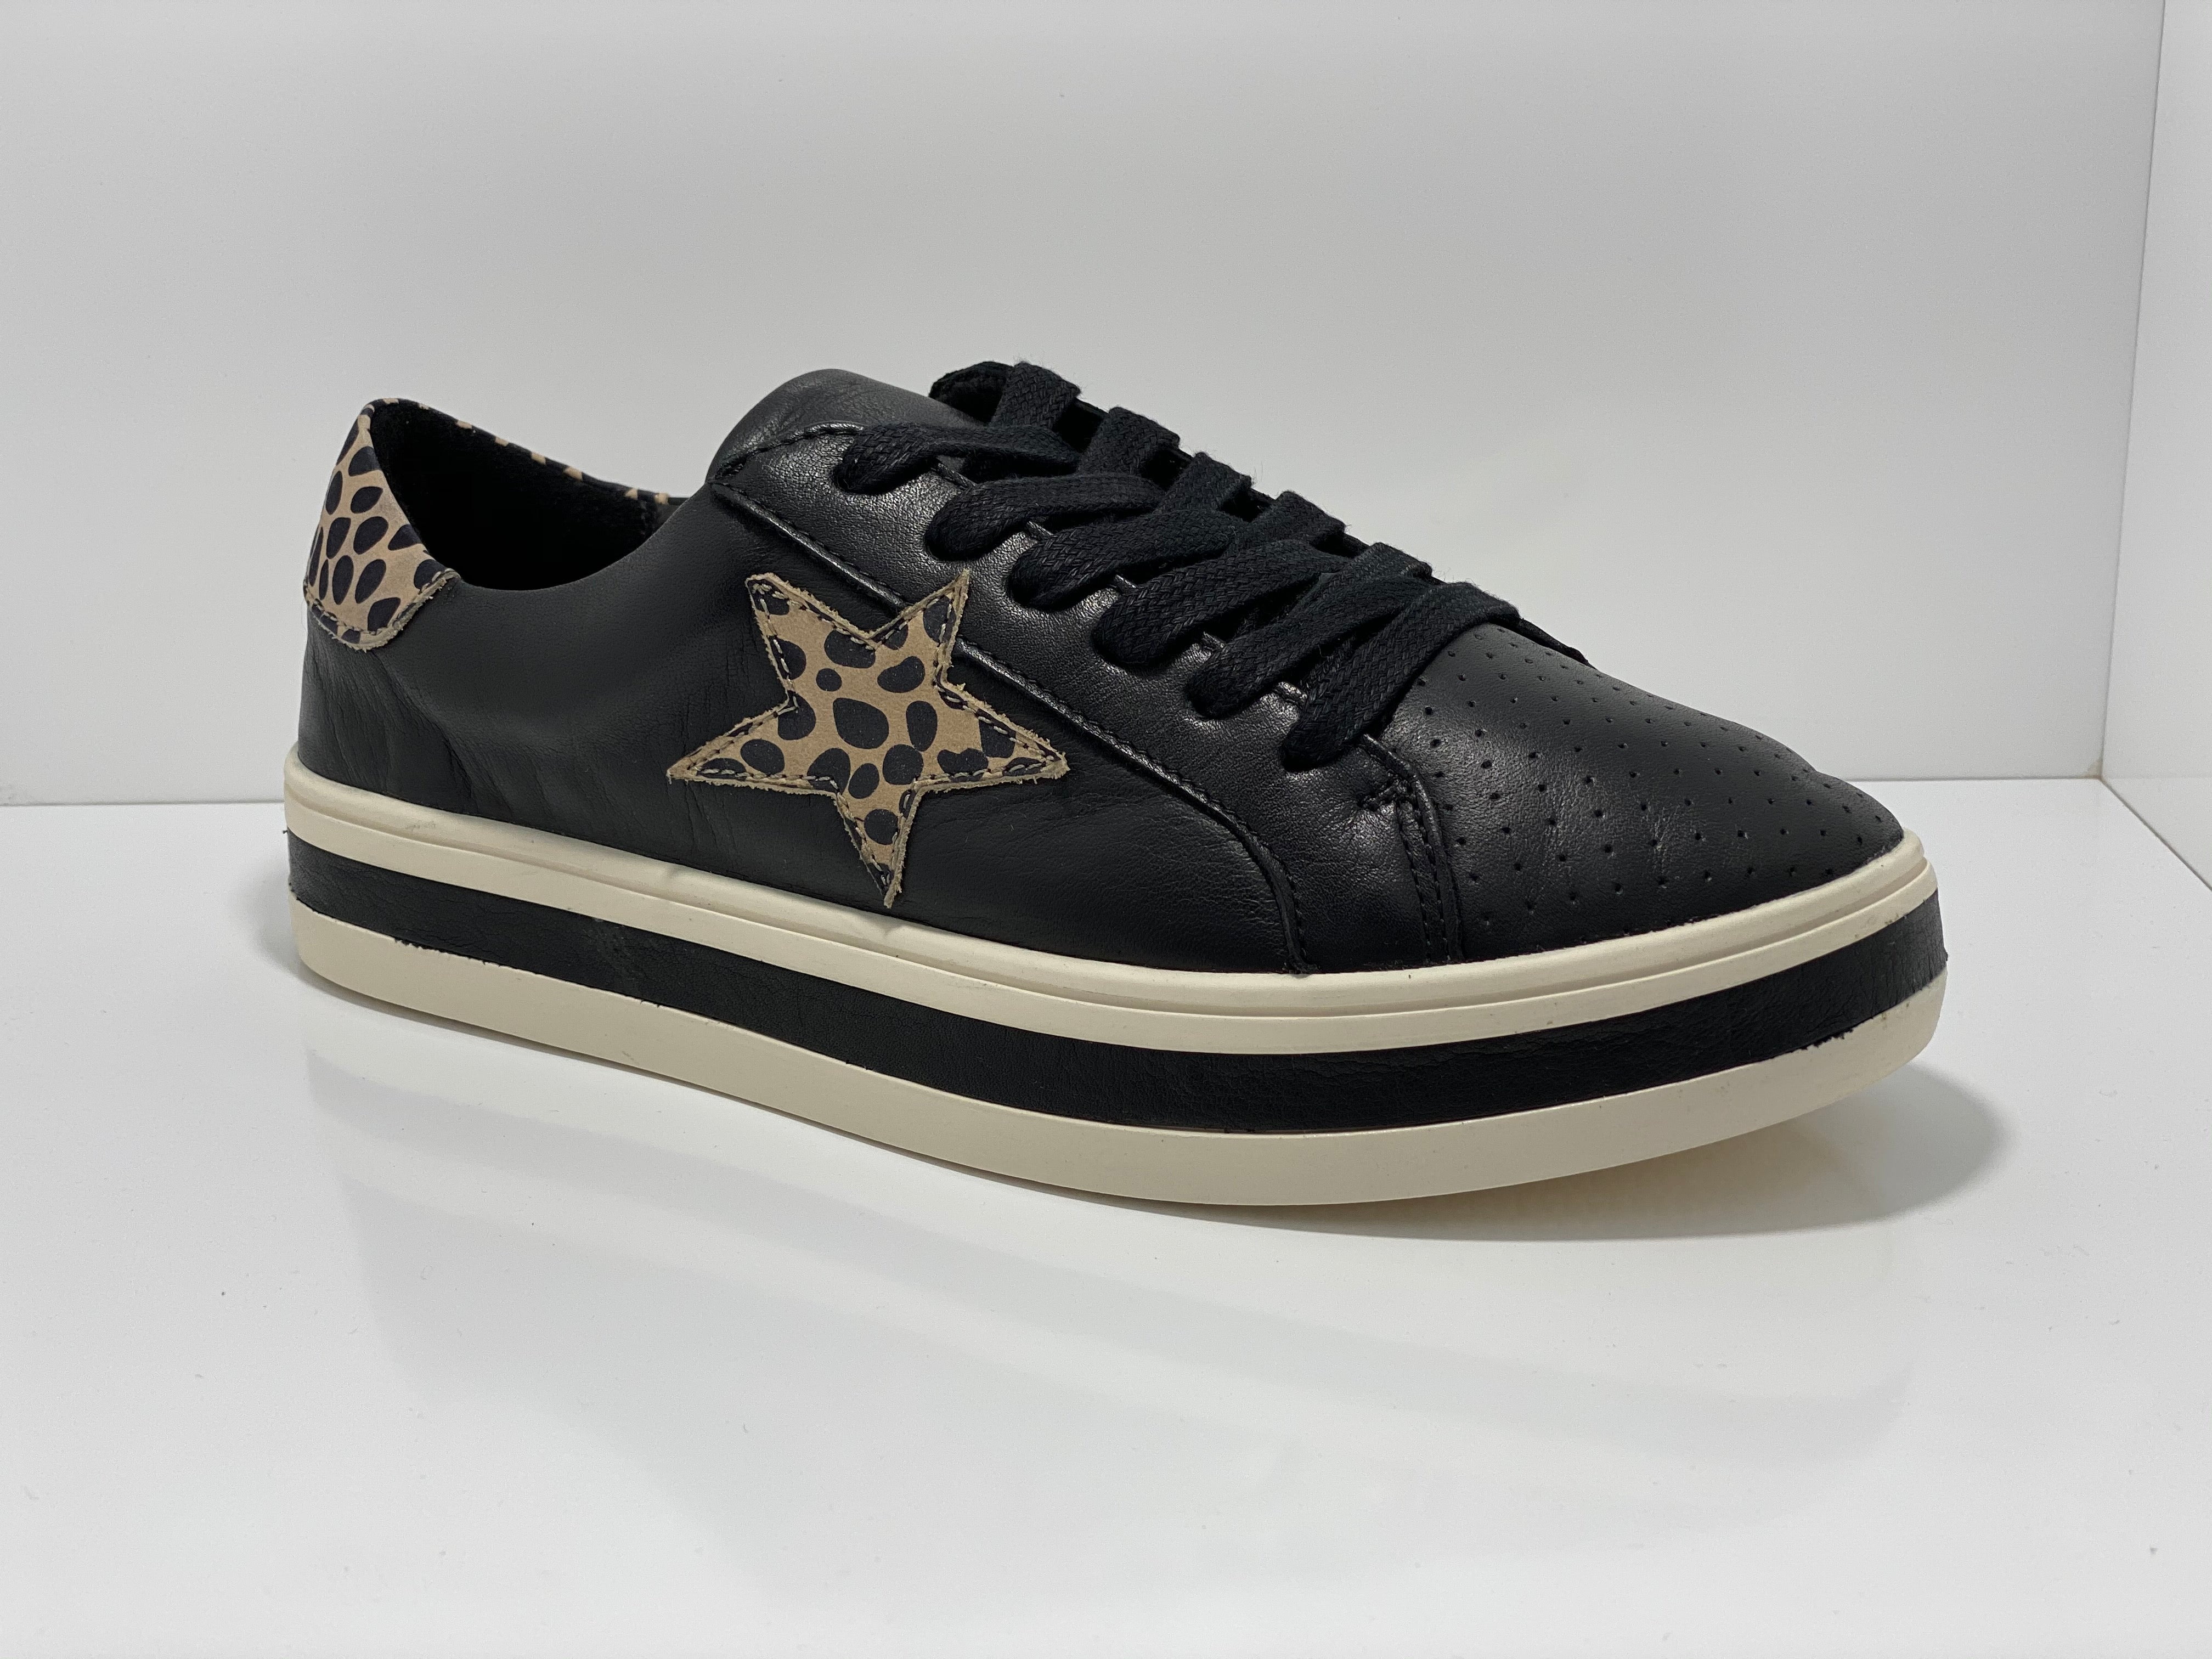 Pixie Leather Lace Up Casual - Star A & E